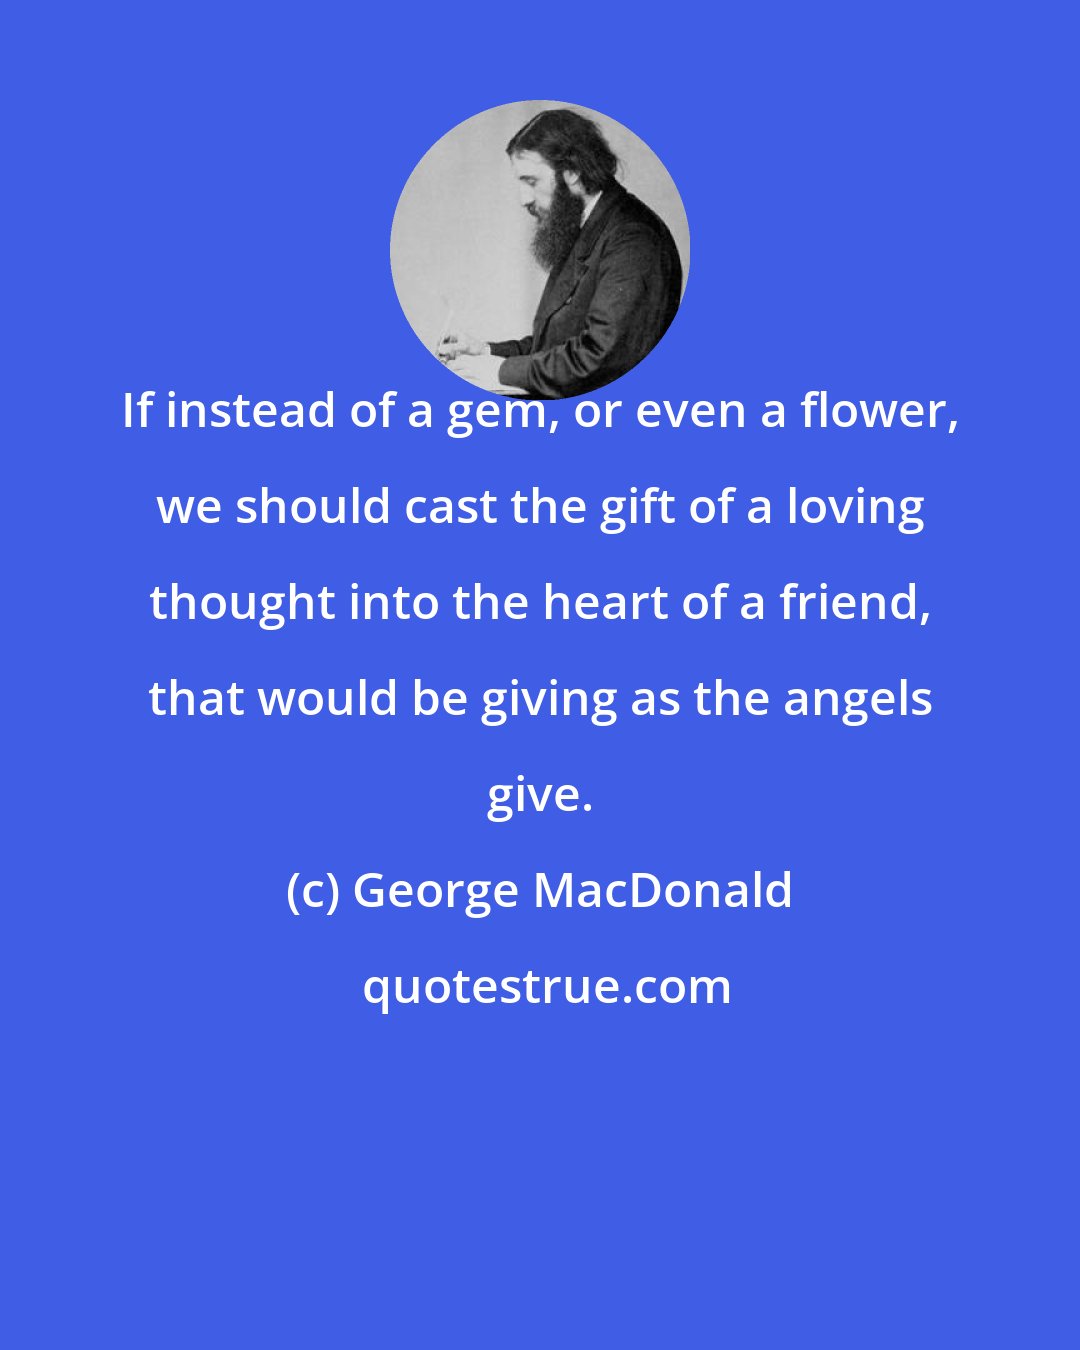 George MacDonald: If instead of a gem, or even a flower, we should cast the gift of a loving thought into the heart of a friend, that would be giving as the angels give.